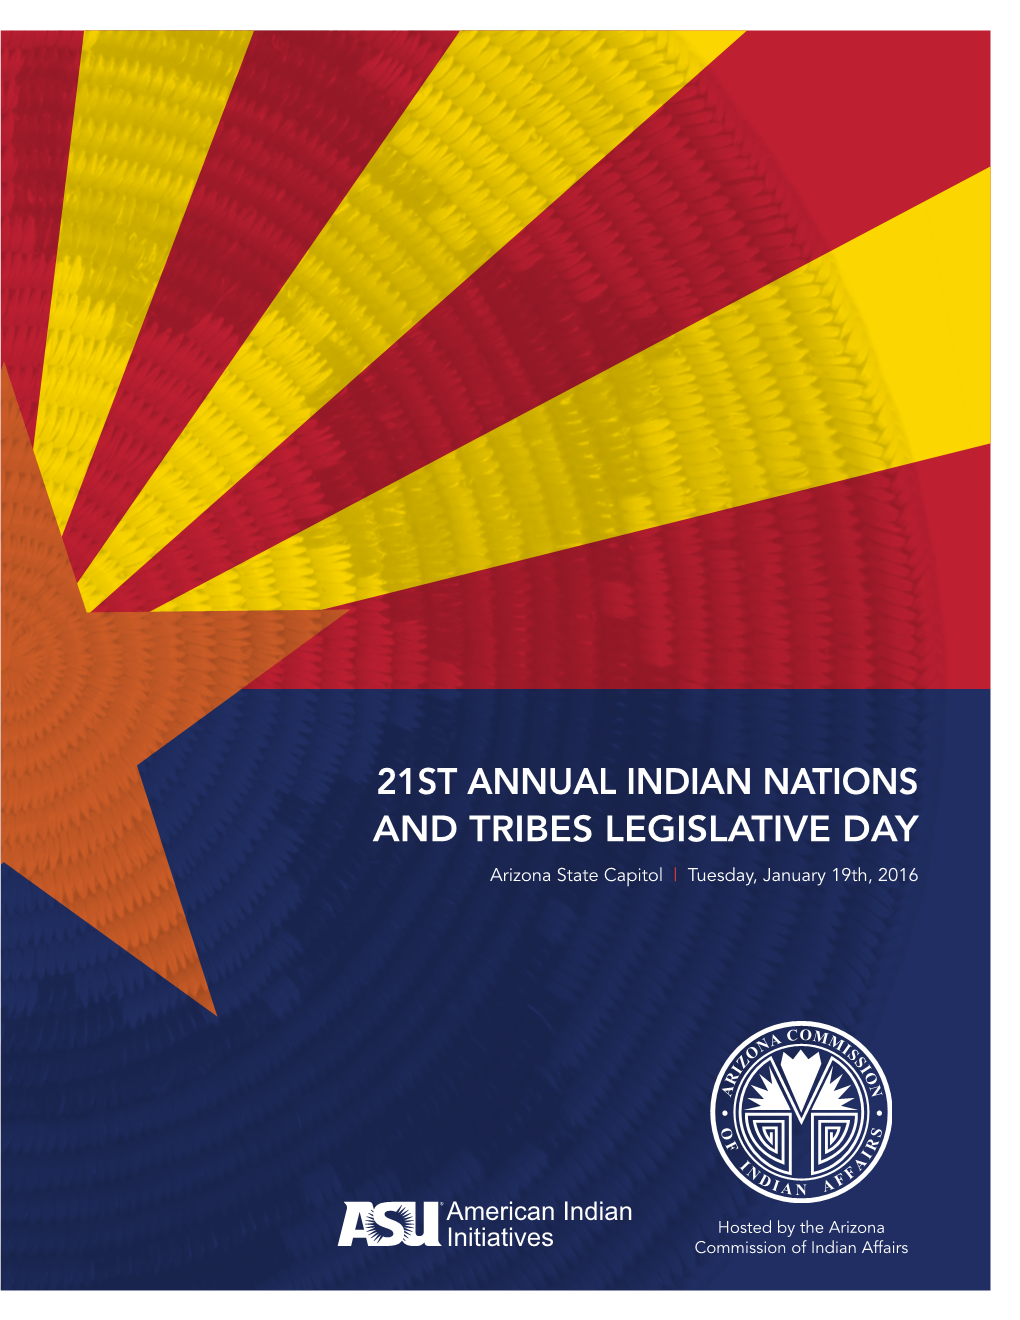 21ST ANNUAL INDIAN NATIONS and TRIBES LEGISLATIVE DAY Arizona State Capitol | Tuesday, January 19Th, 2016